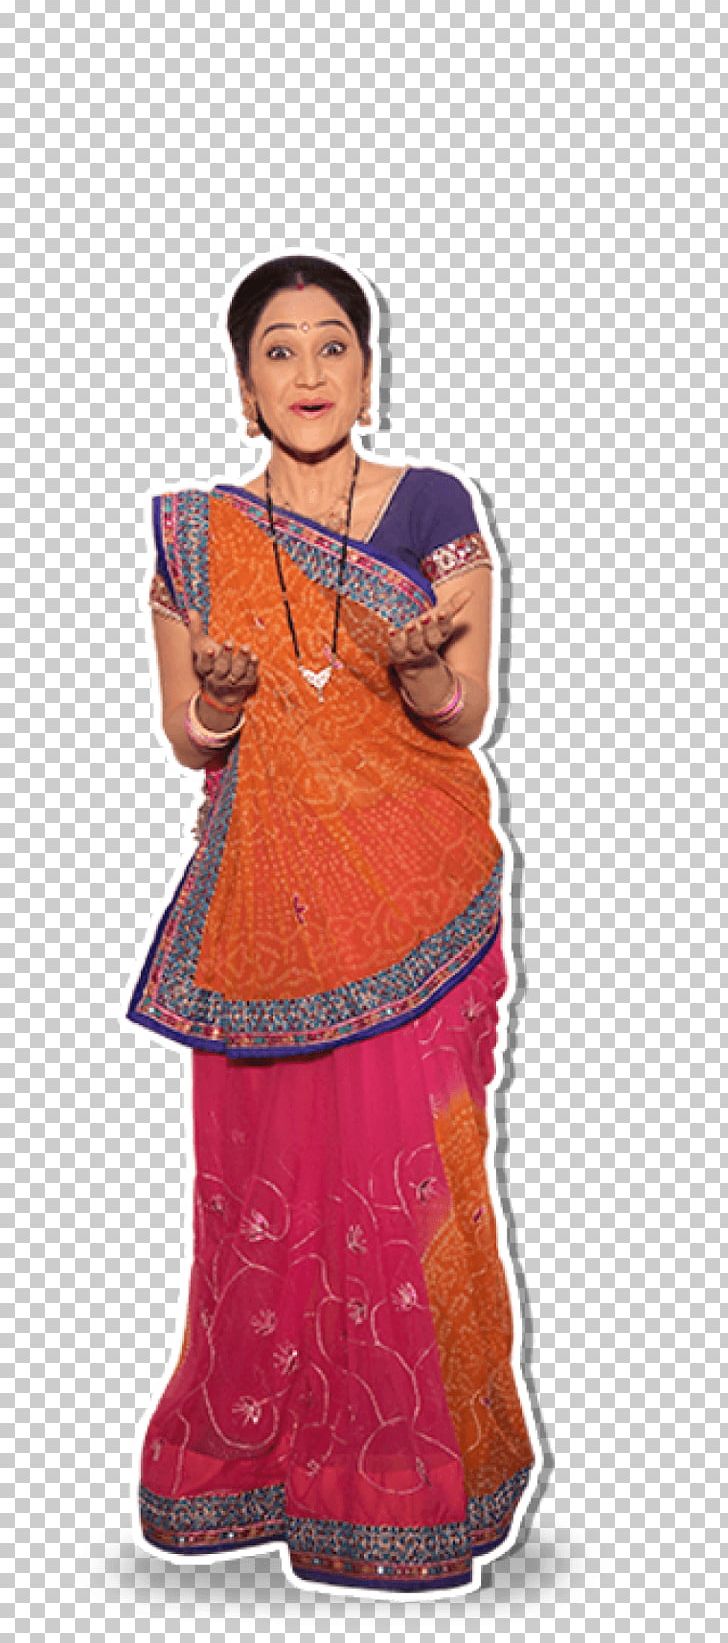 Shoulder Costume Sari PNG, Clipart, Abdomen, Clothing, Costume, Joint, Others Free PNG Download